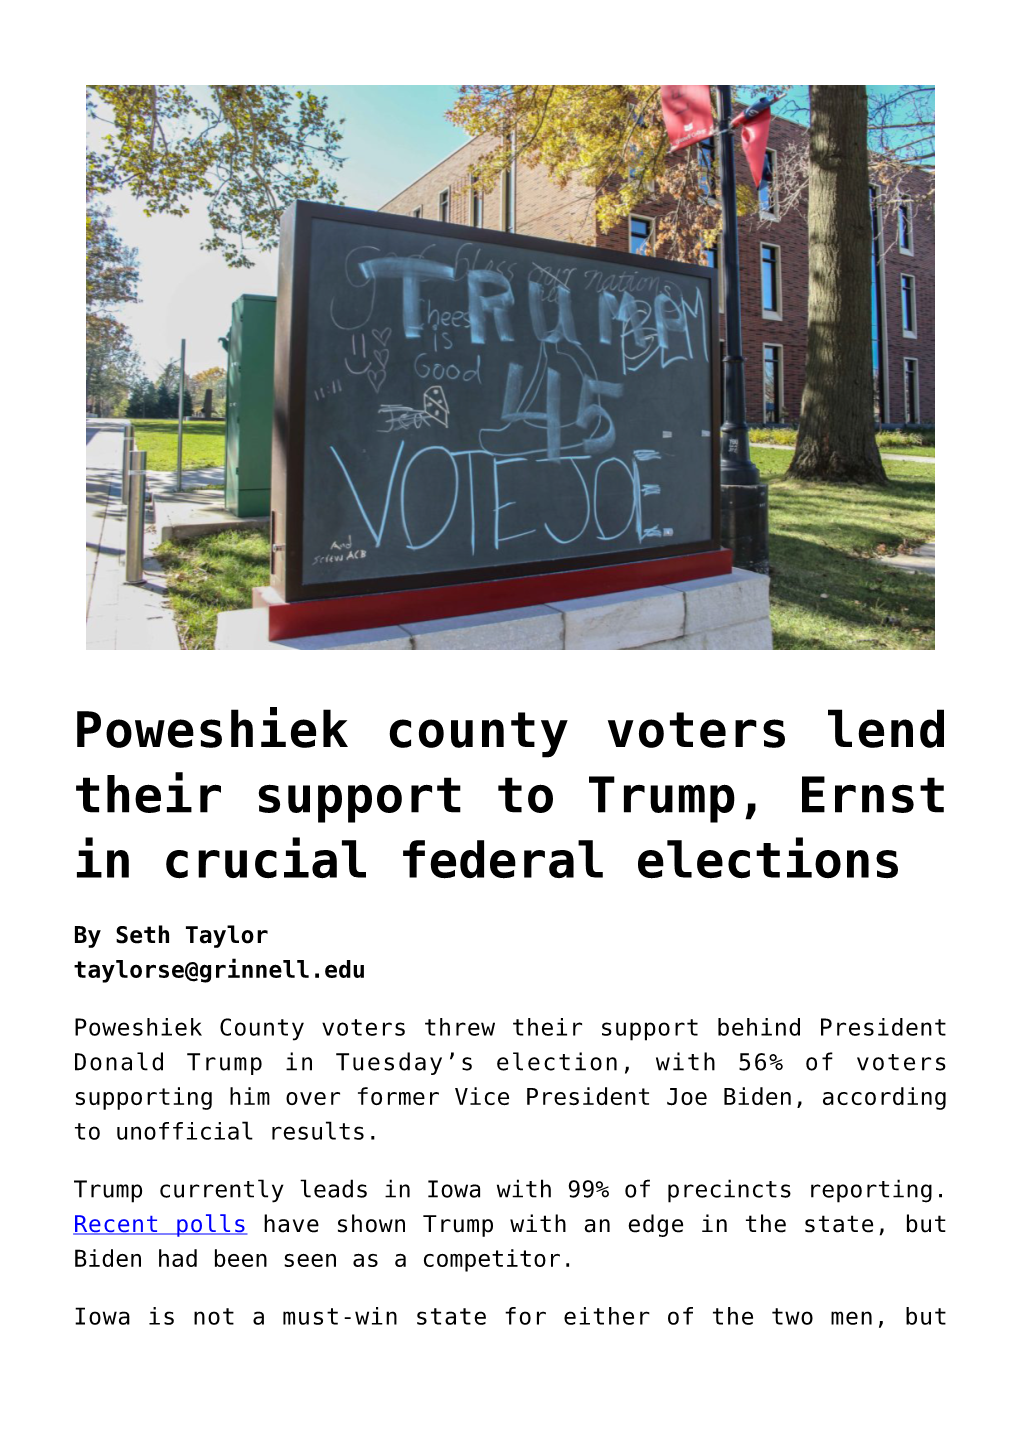 Poweshiek County Voters Lend Their Support to Trump, Ernst in Crucial Federal Elections